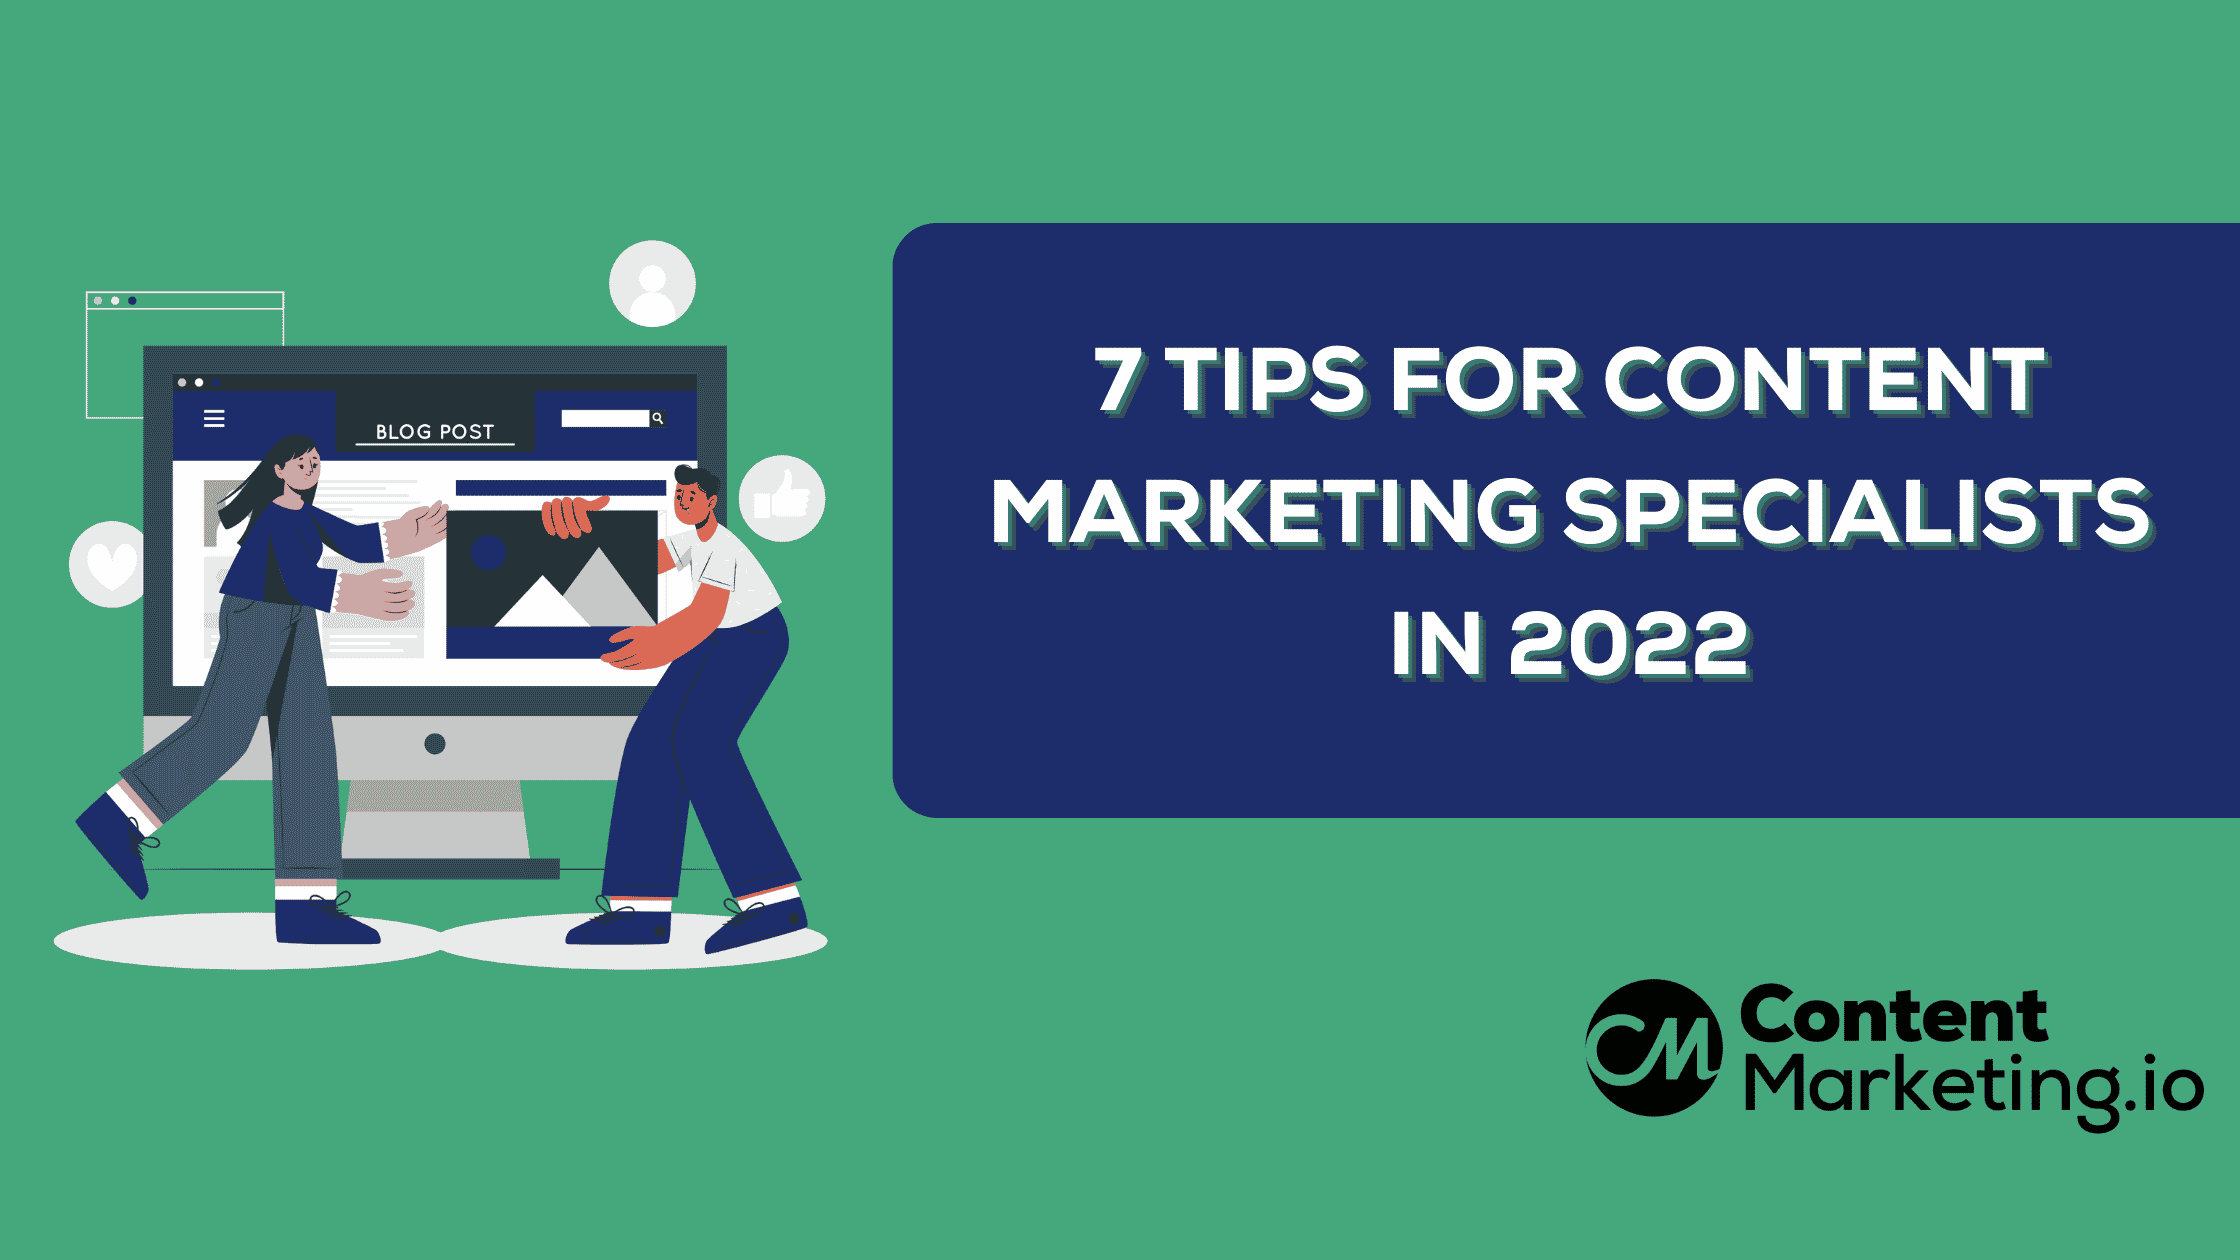 7 Tips for Content Marketing Specialists